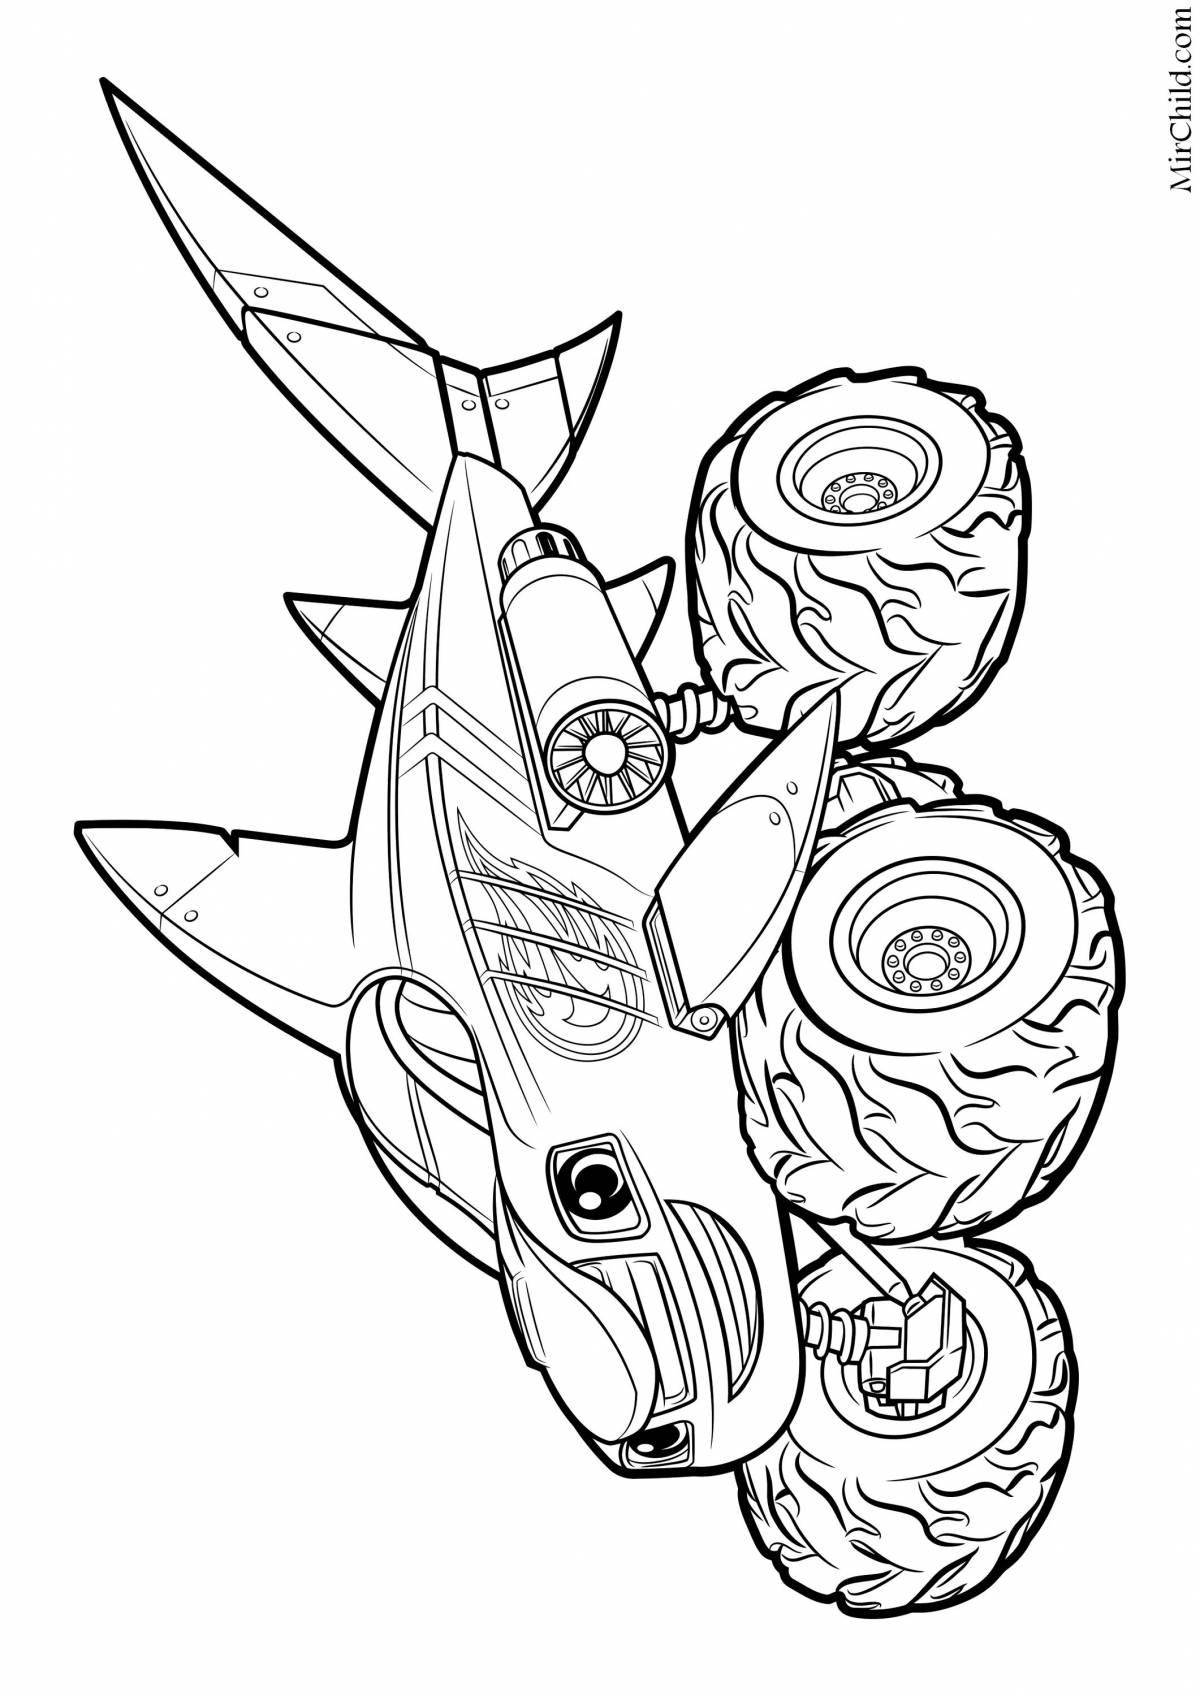 Exciting robot shark coloring page